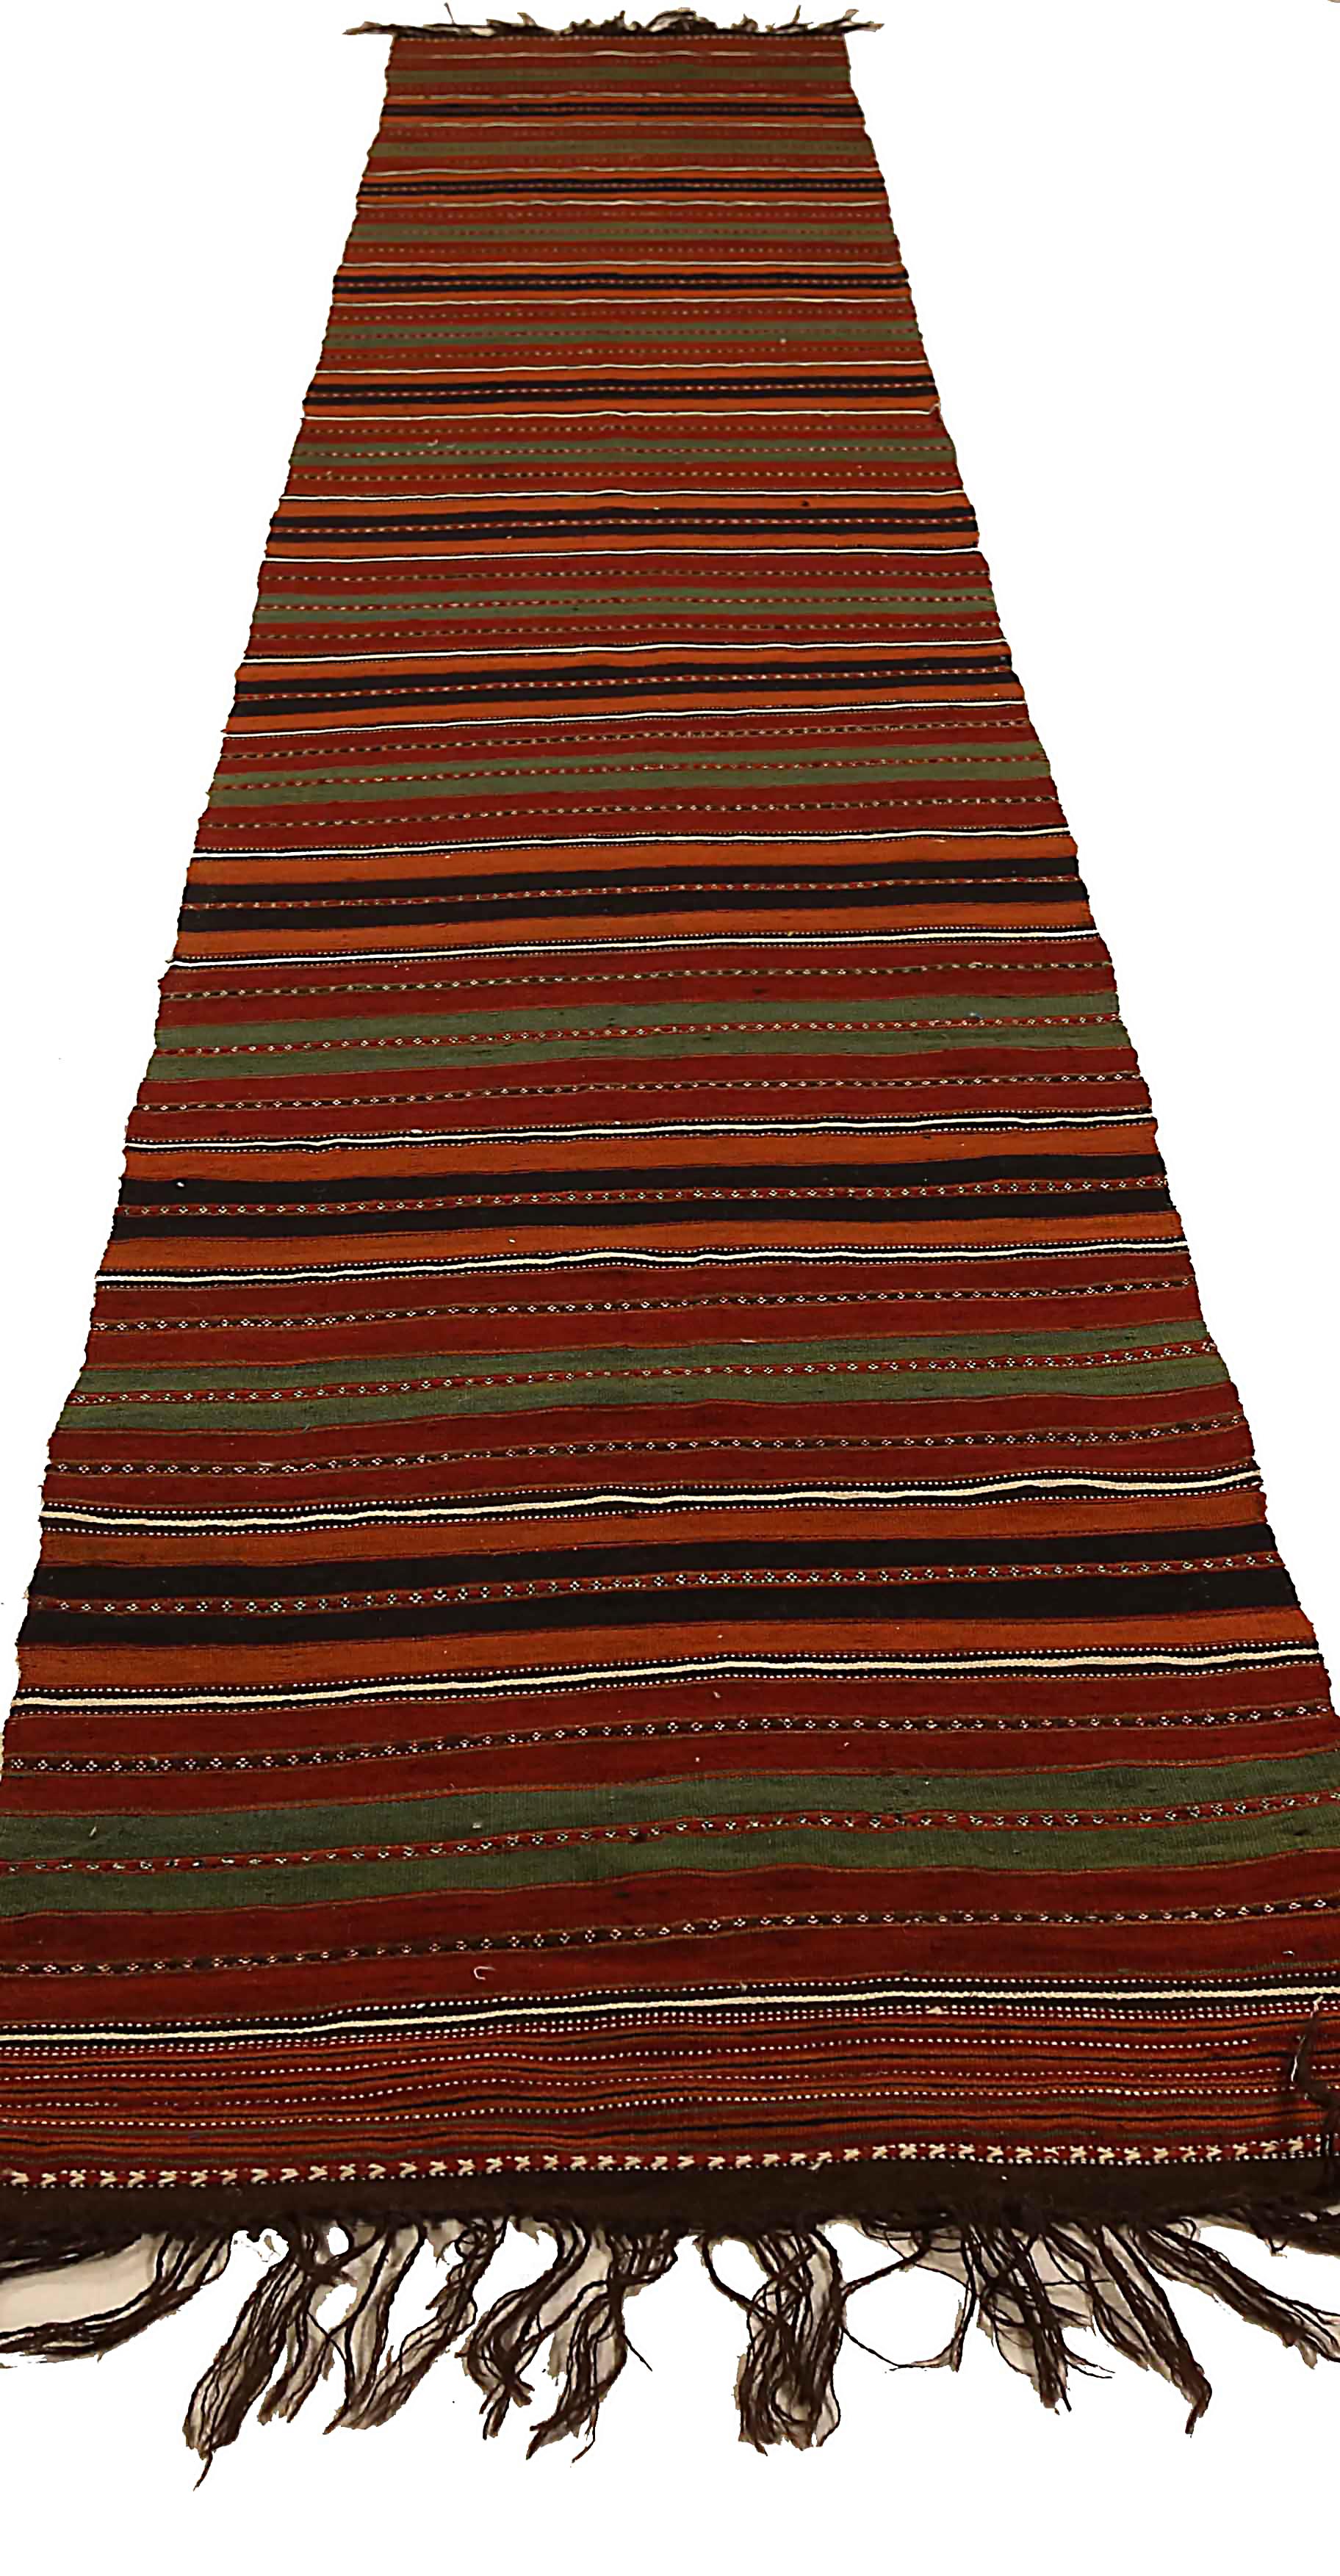 Antique handmade Persian runner rug from high quality sheep’s wool and colored with eco-friendly vegetable dyes that are proven safe for humans and pets alike. It’s a Classic Kilim design showcasing colored stripes on a regal brown/red field. It’s a